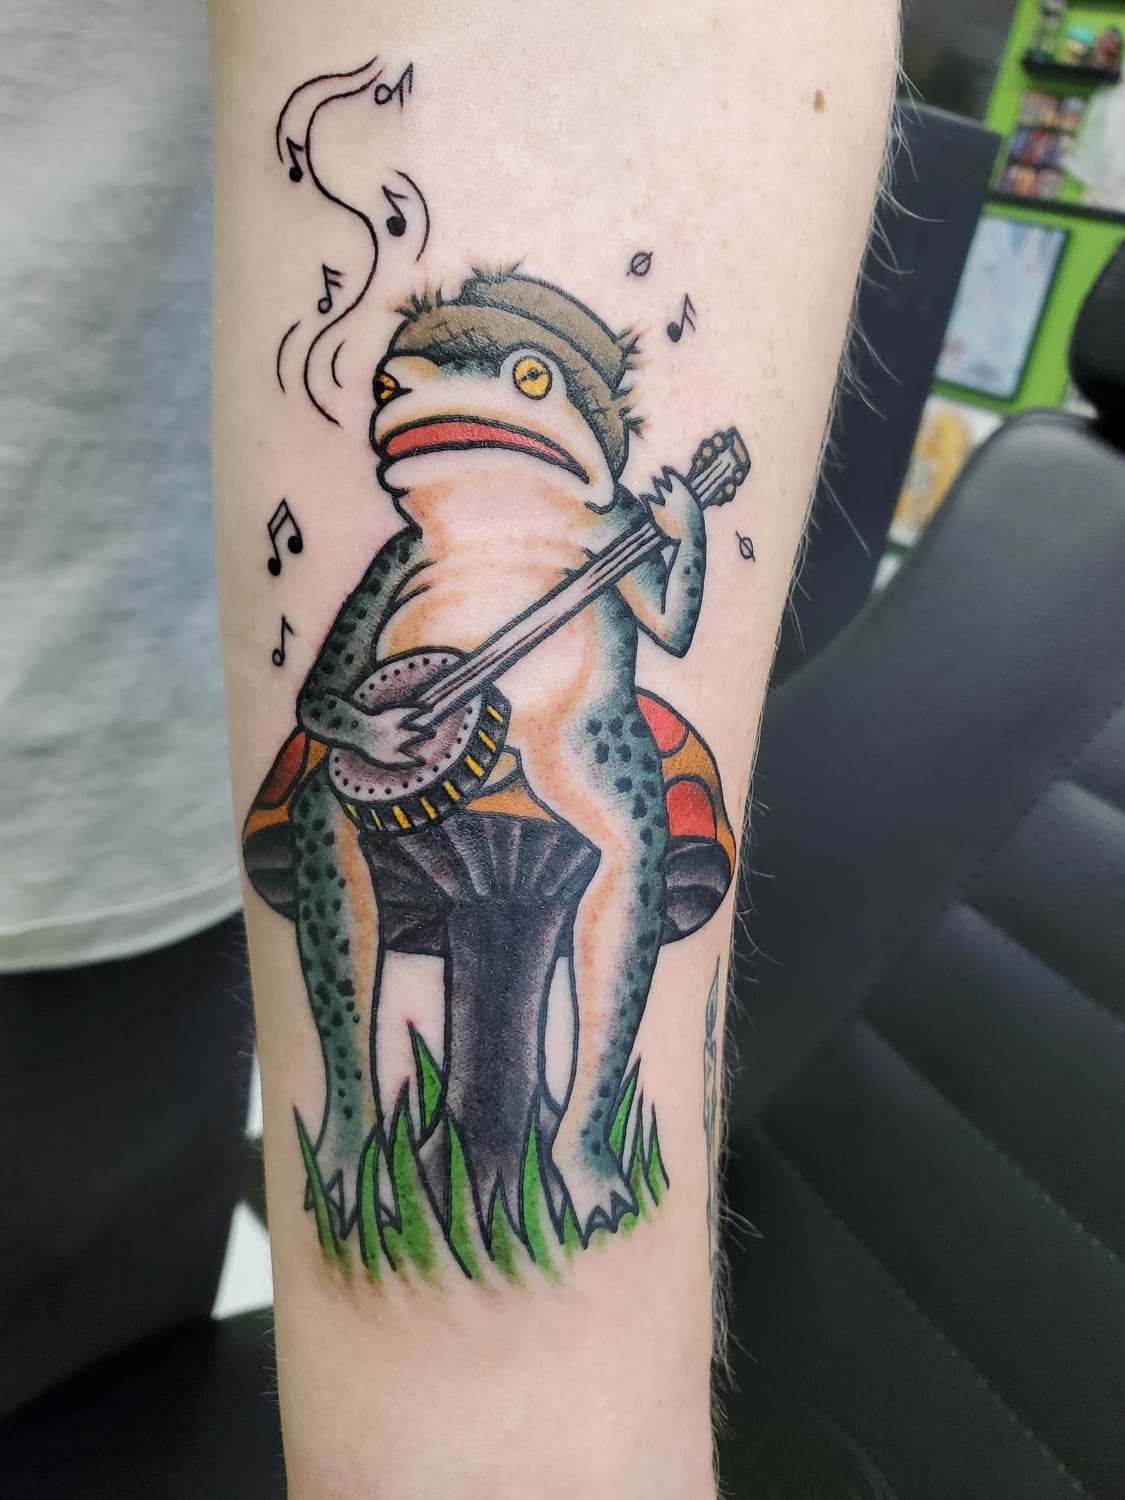 "They done turned him into a horny toad" Leslie Wood @ Modern Art Tattoo in Tucson, AZ